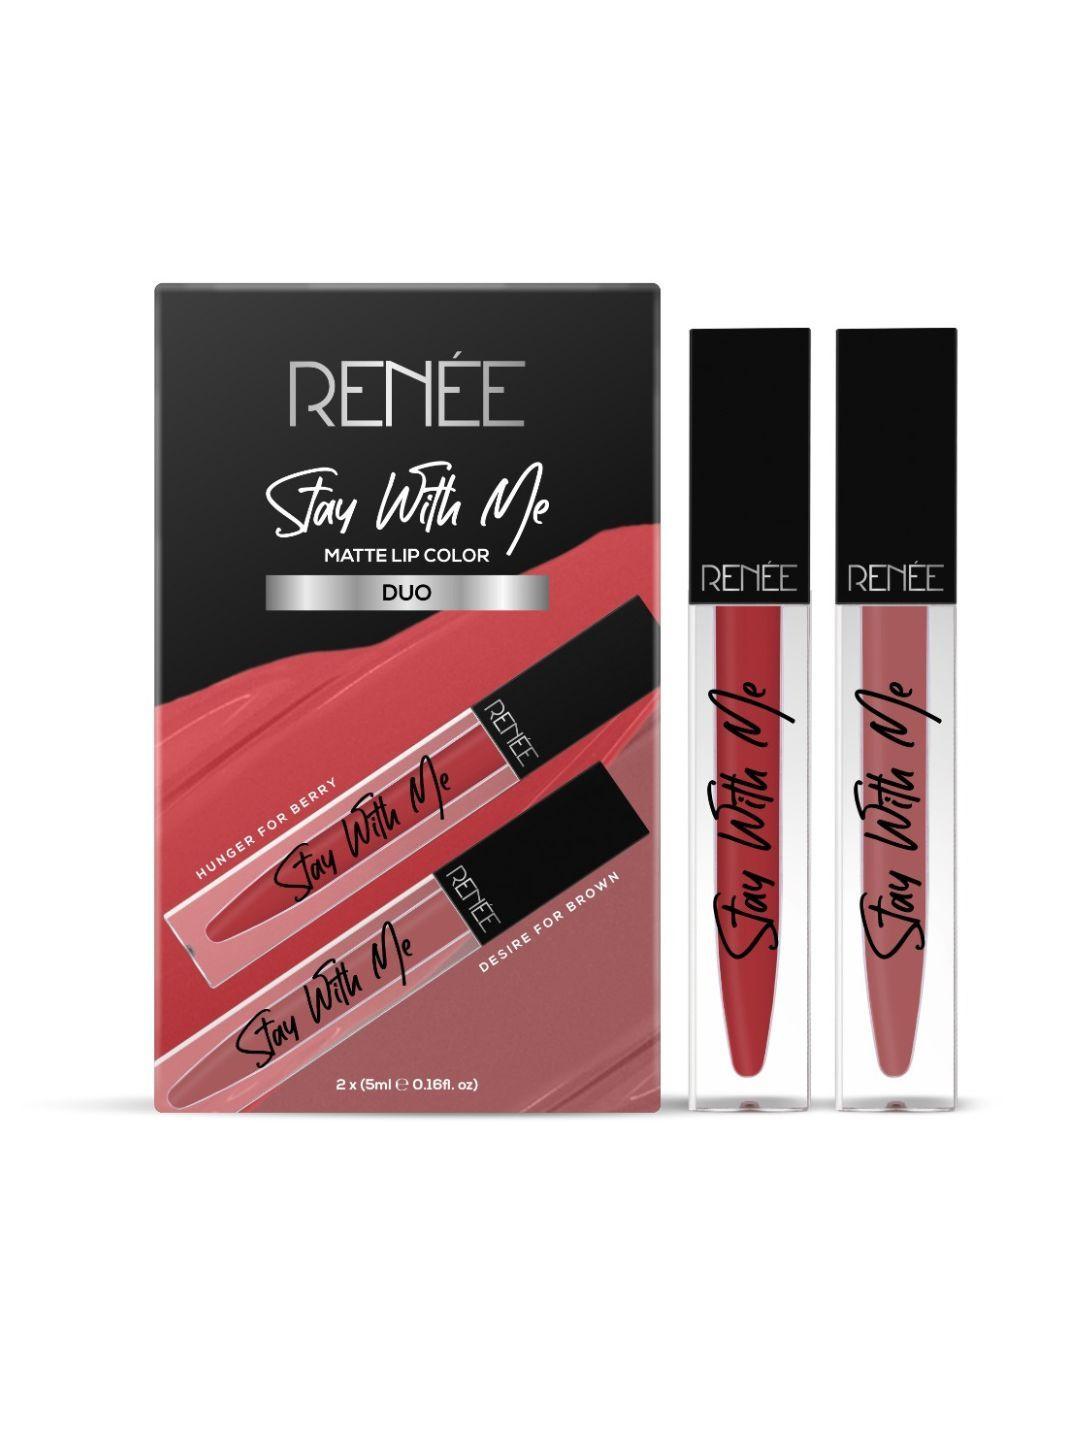 renee stay with me matte lipstick duo 5ml each - desire for brown & hunger for berry